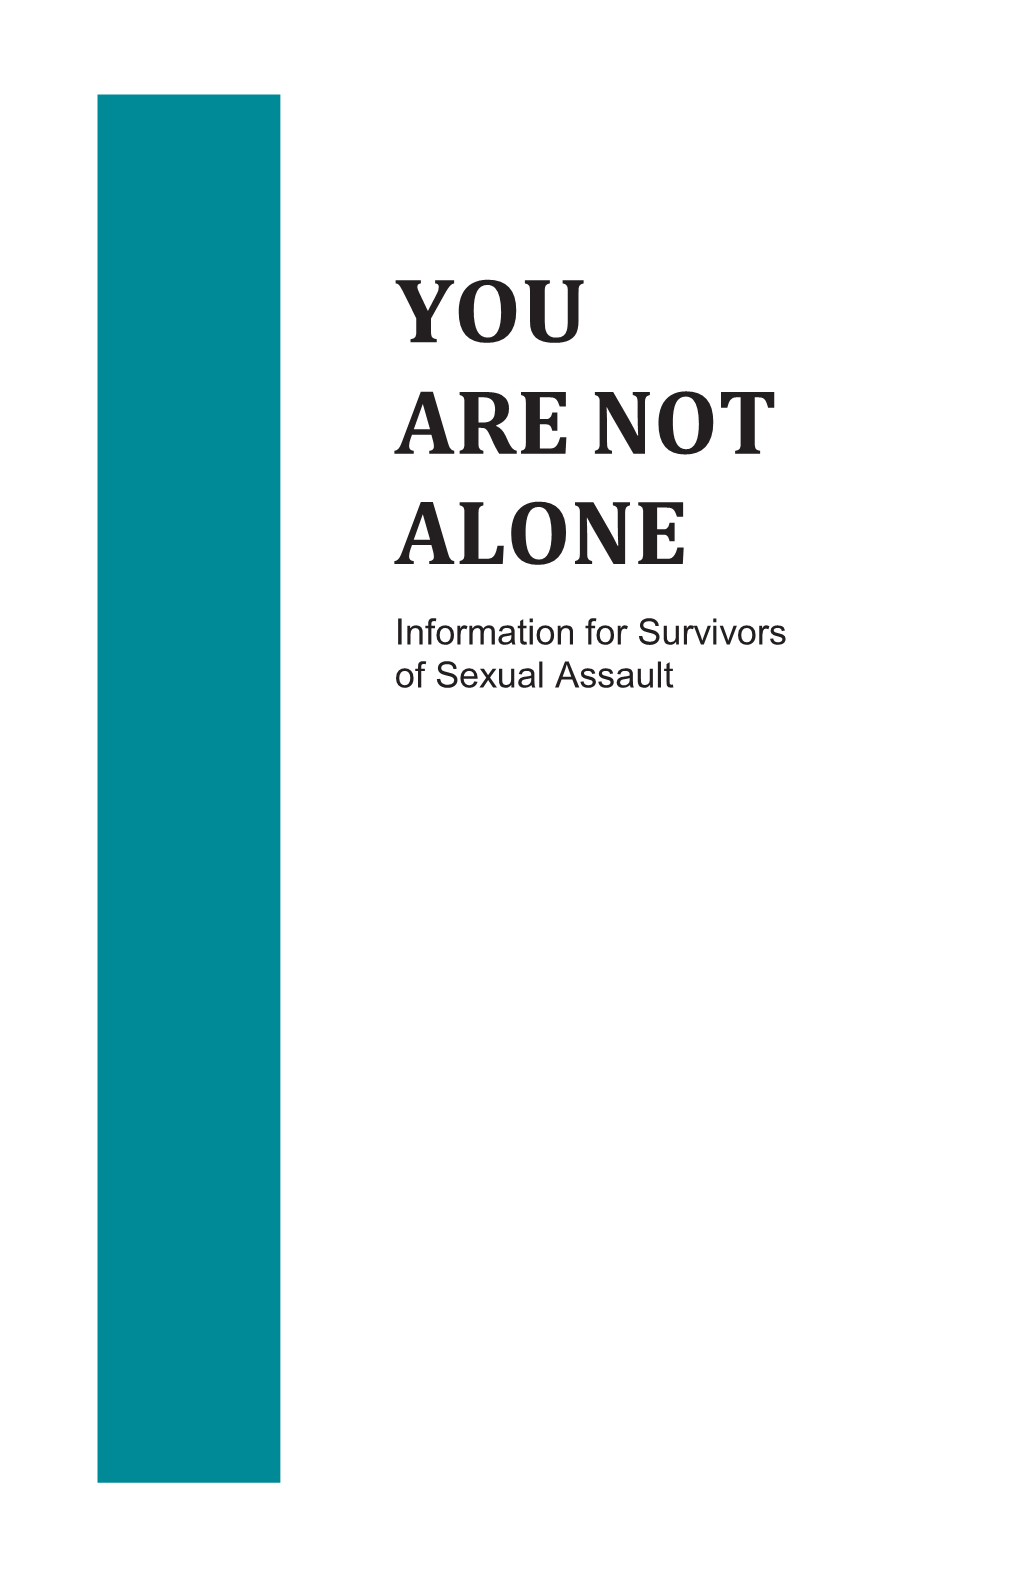 YOU ARE NOT ALONE Information for Survivors of Sexual Assault Acknowledgements